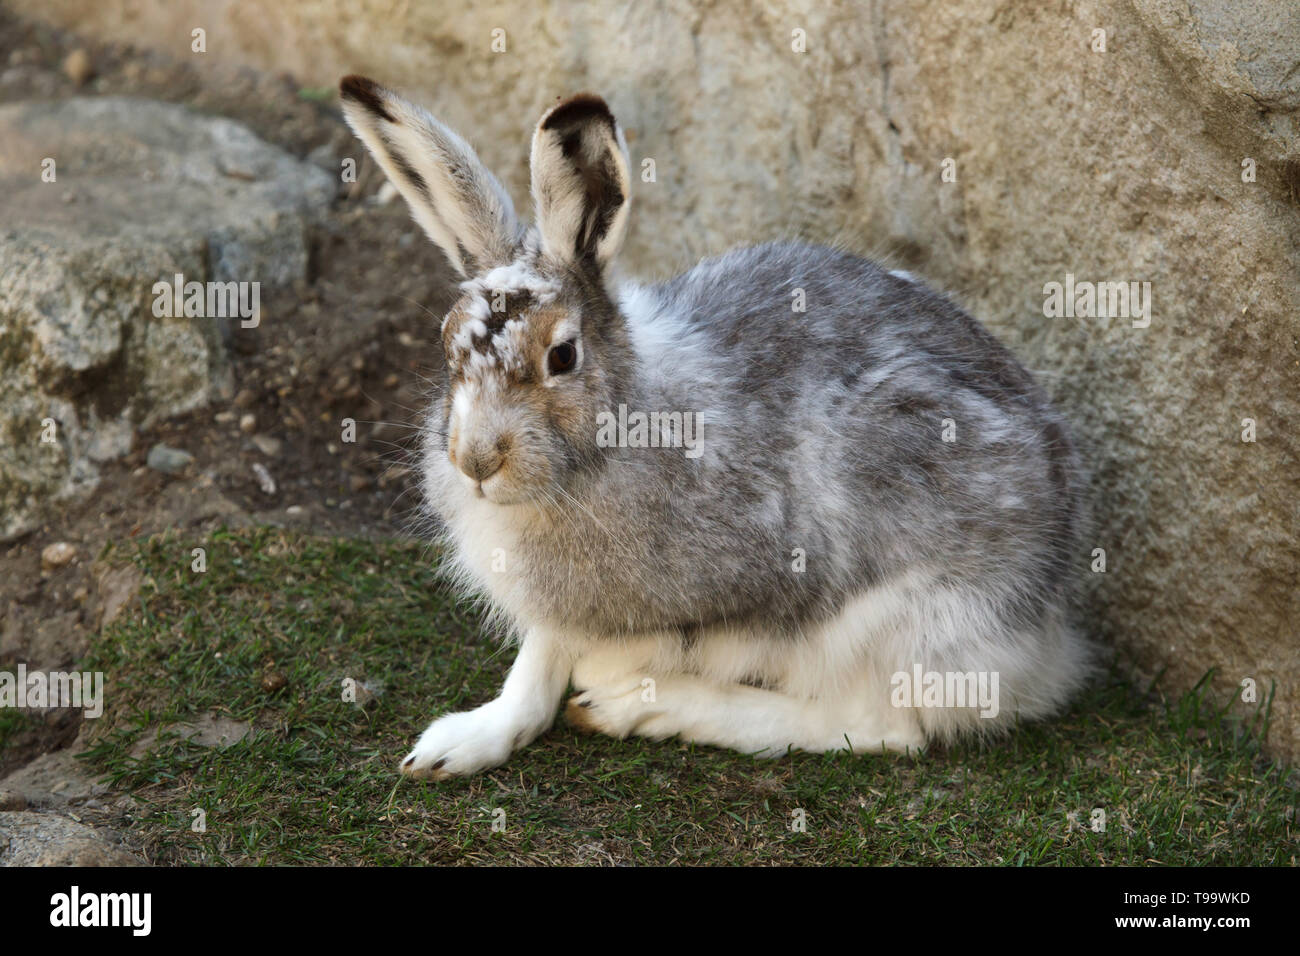 Mountain hare (Lepus timidus), also known as the white hare. Stock Photo